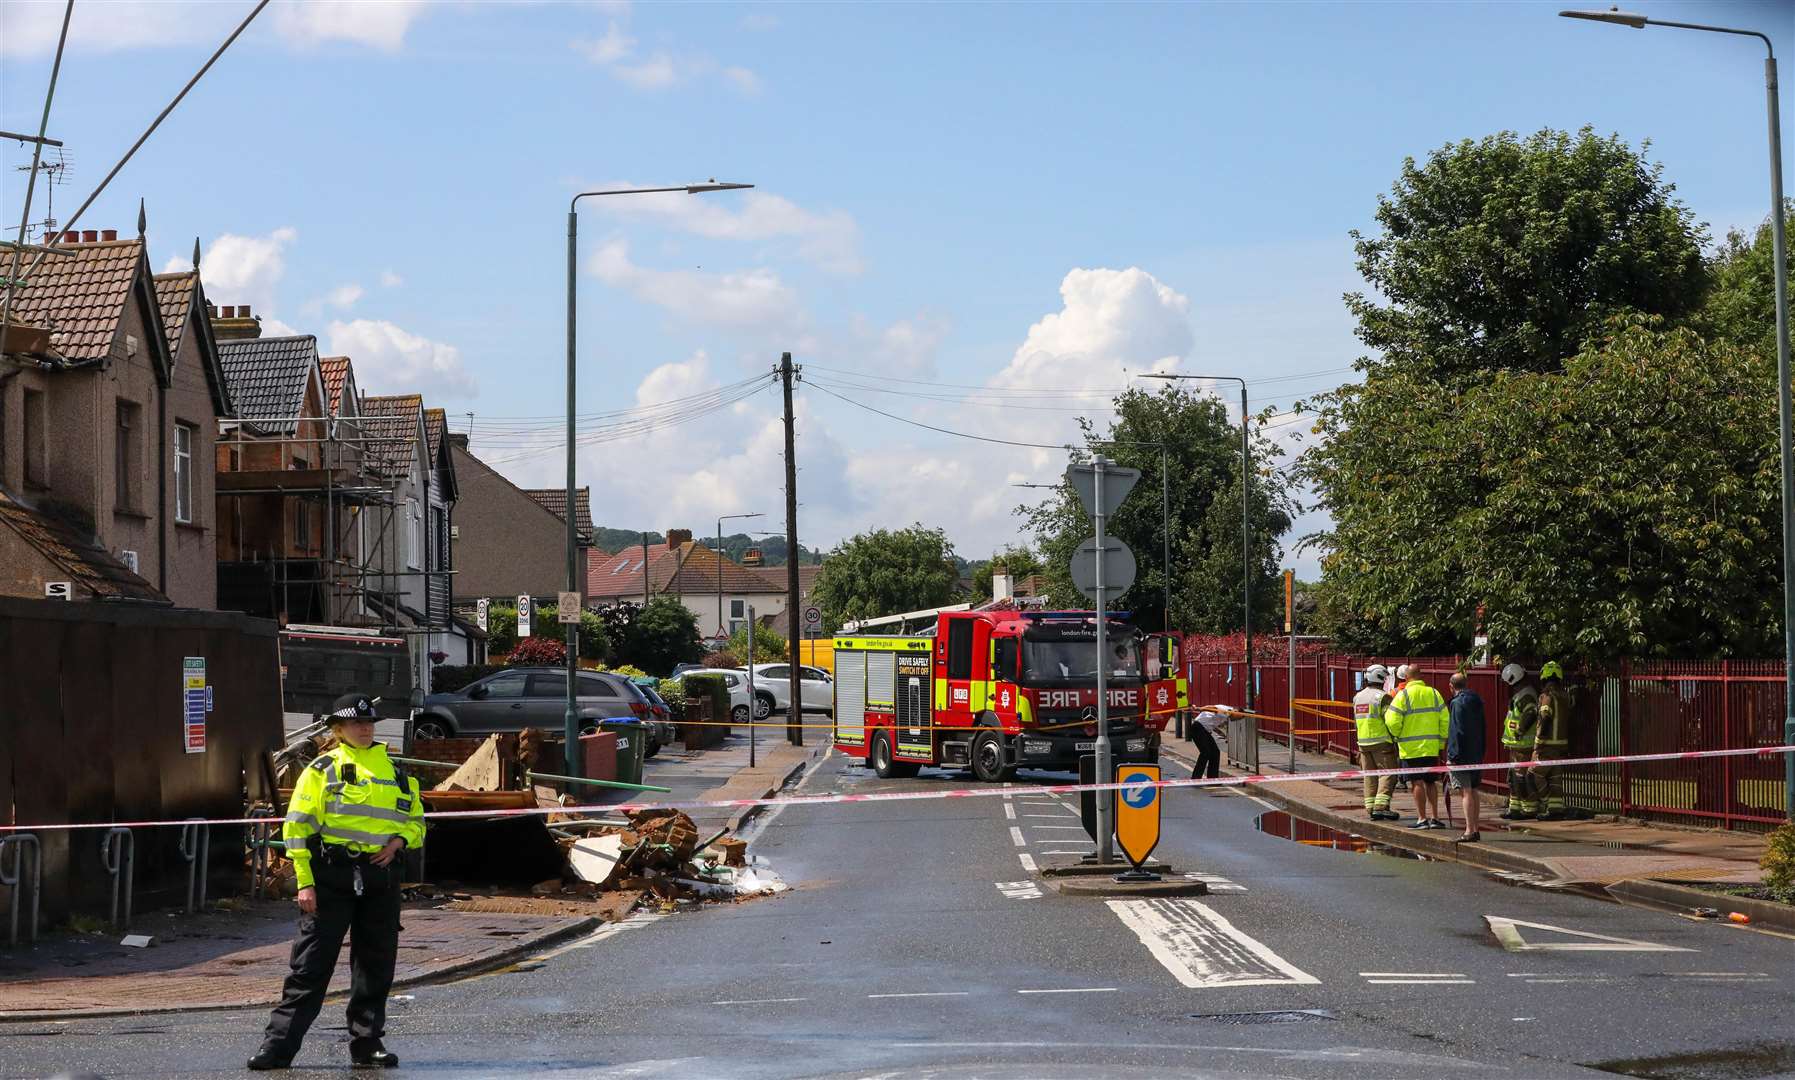 The road was closed following the building collapse. Image from UKNIP